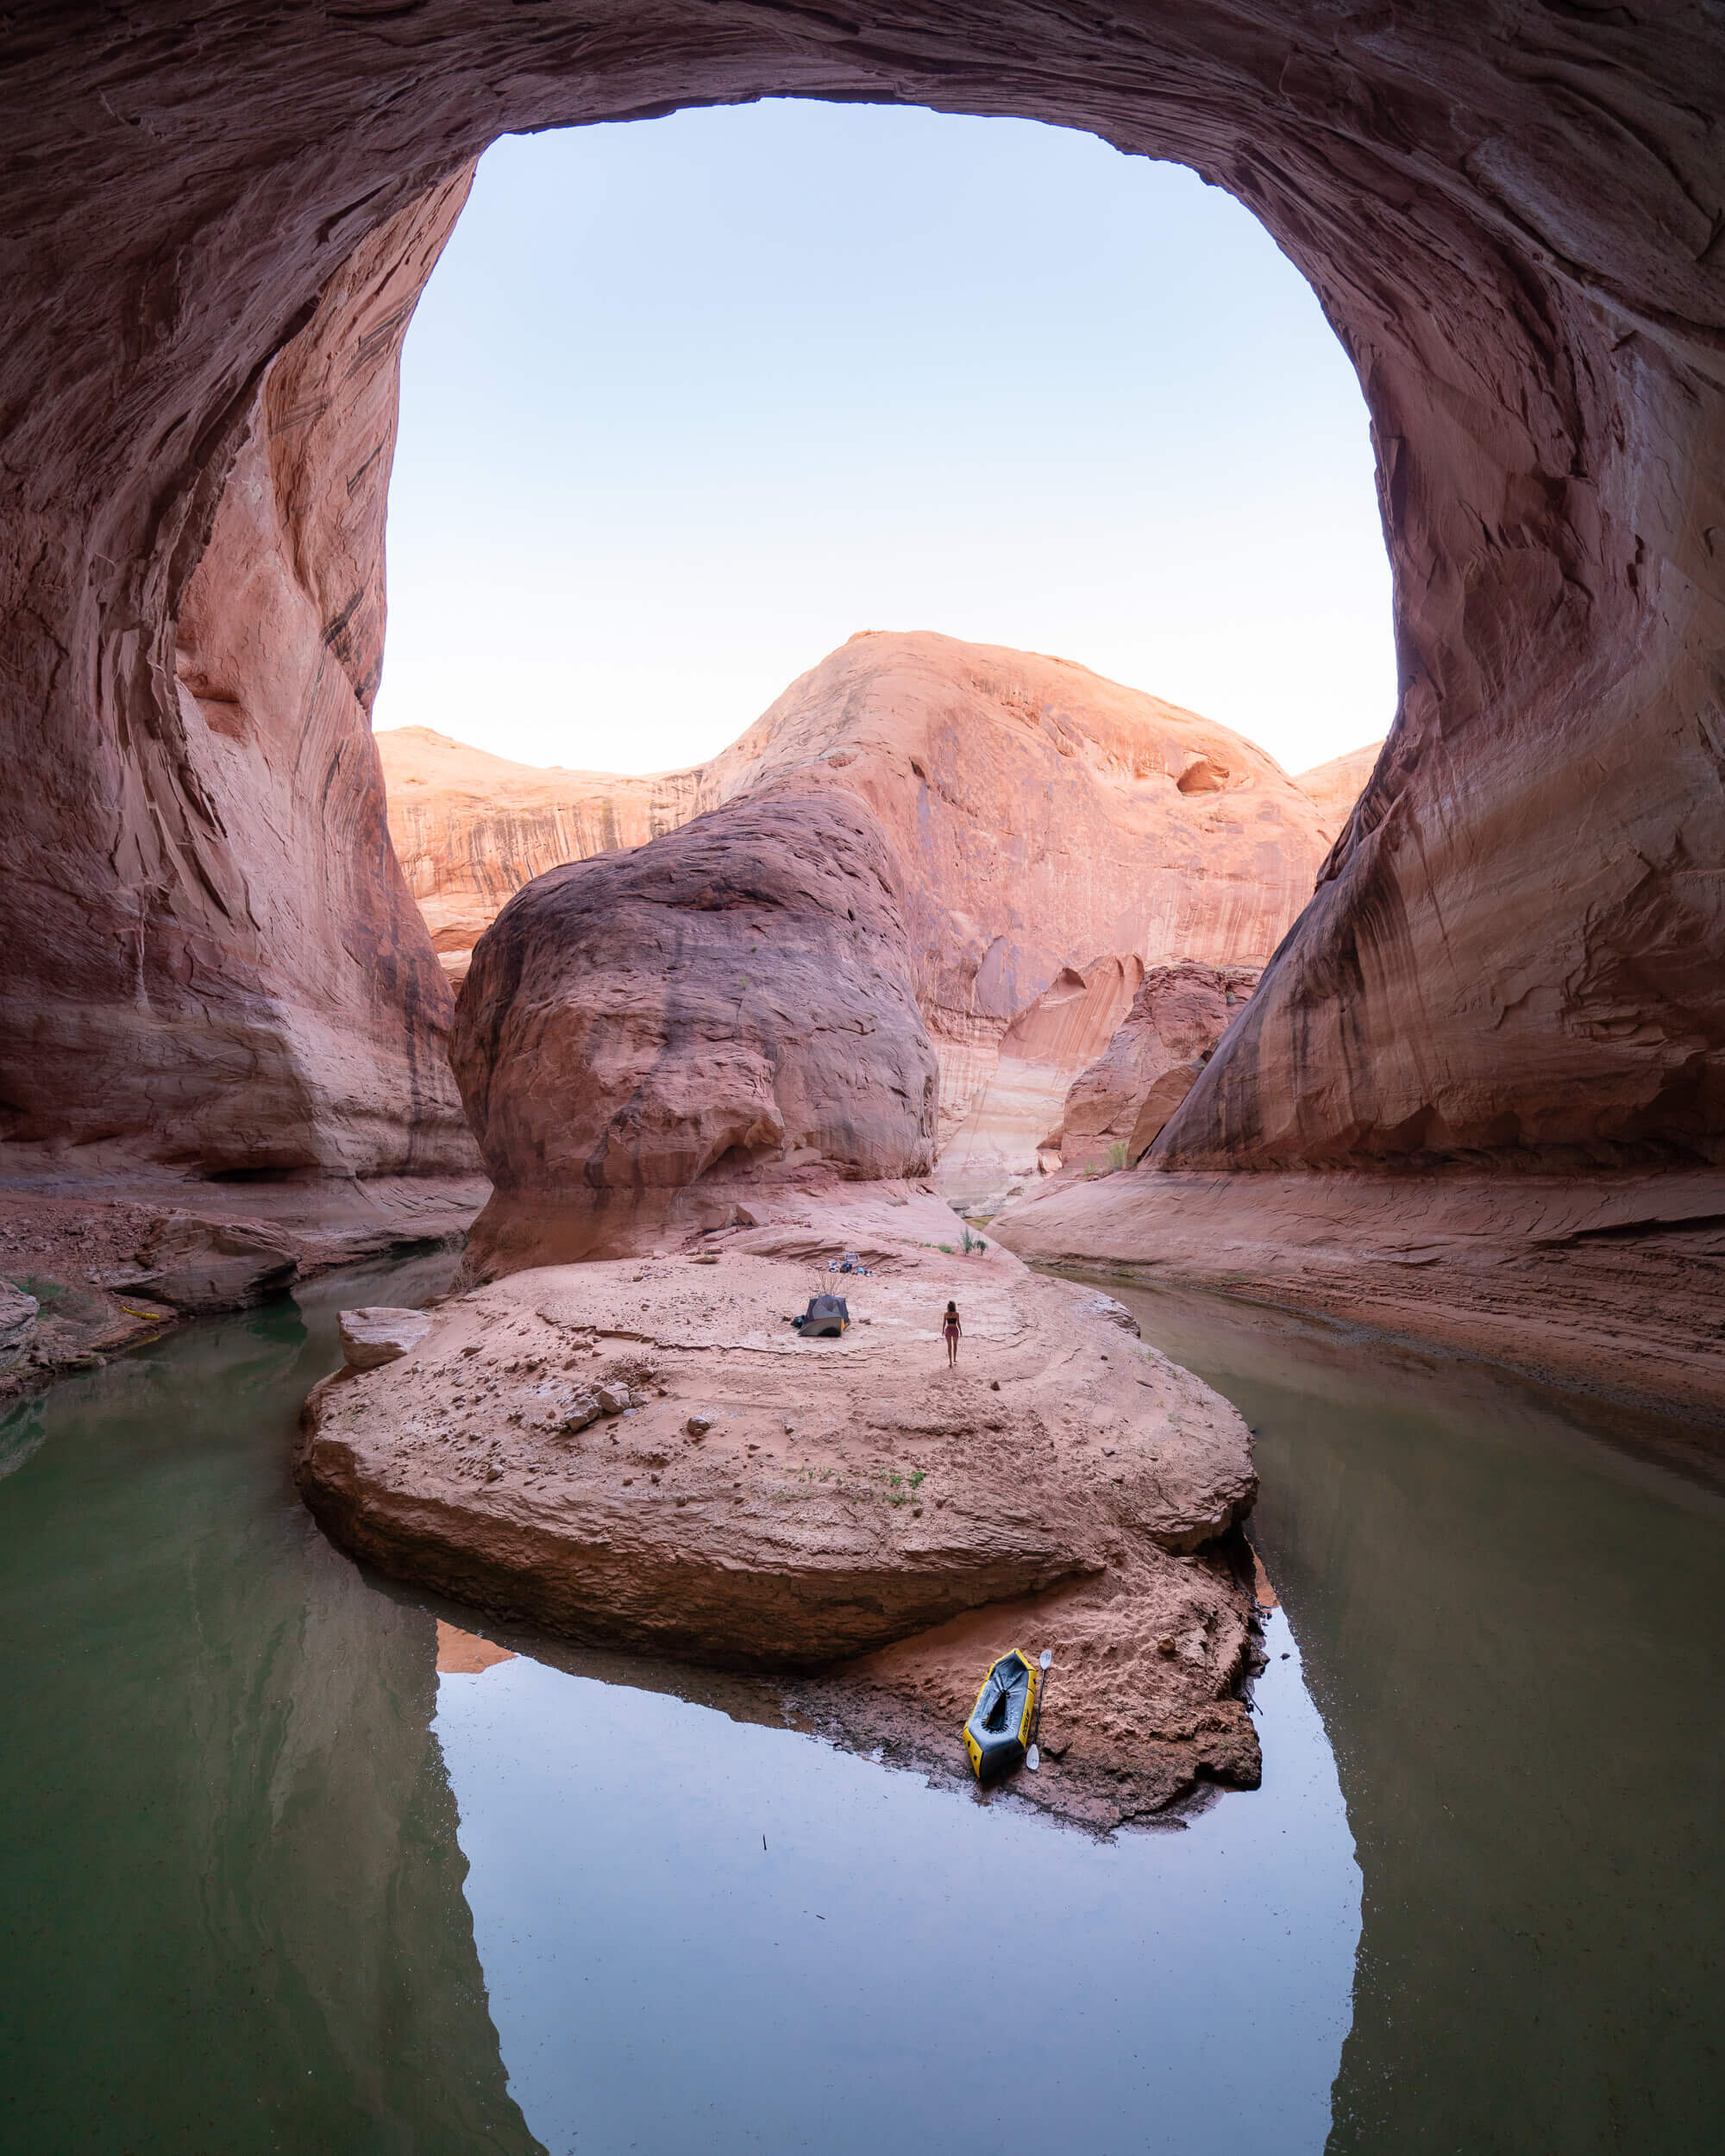 One of our many camp sites during our Lake Powell packrafting trip.